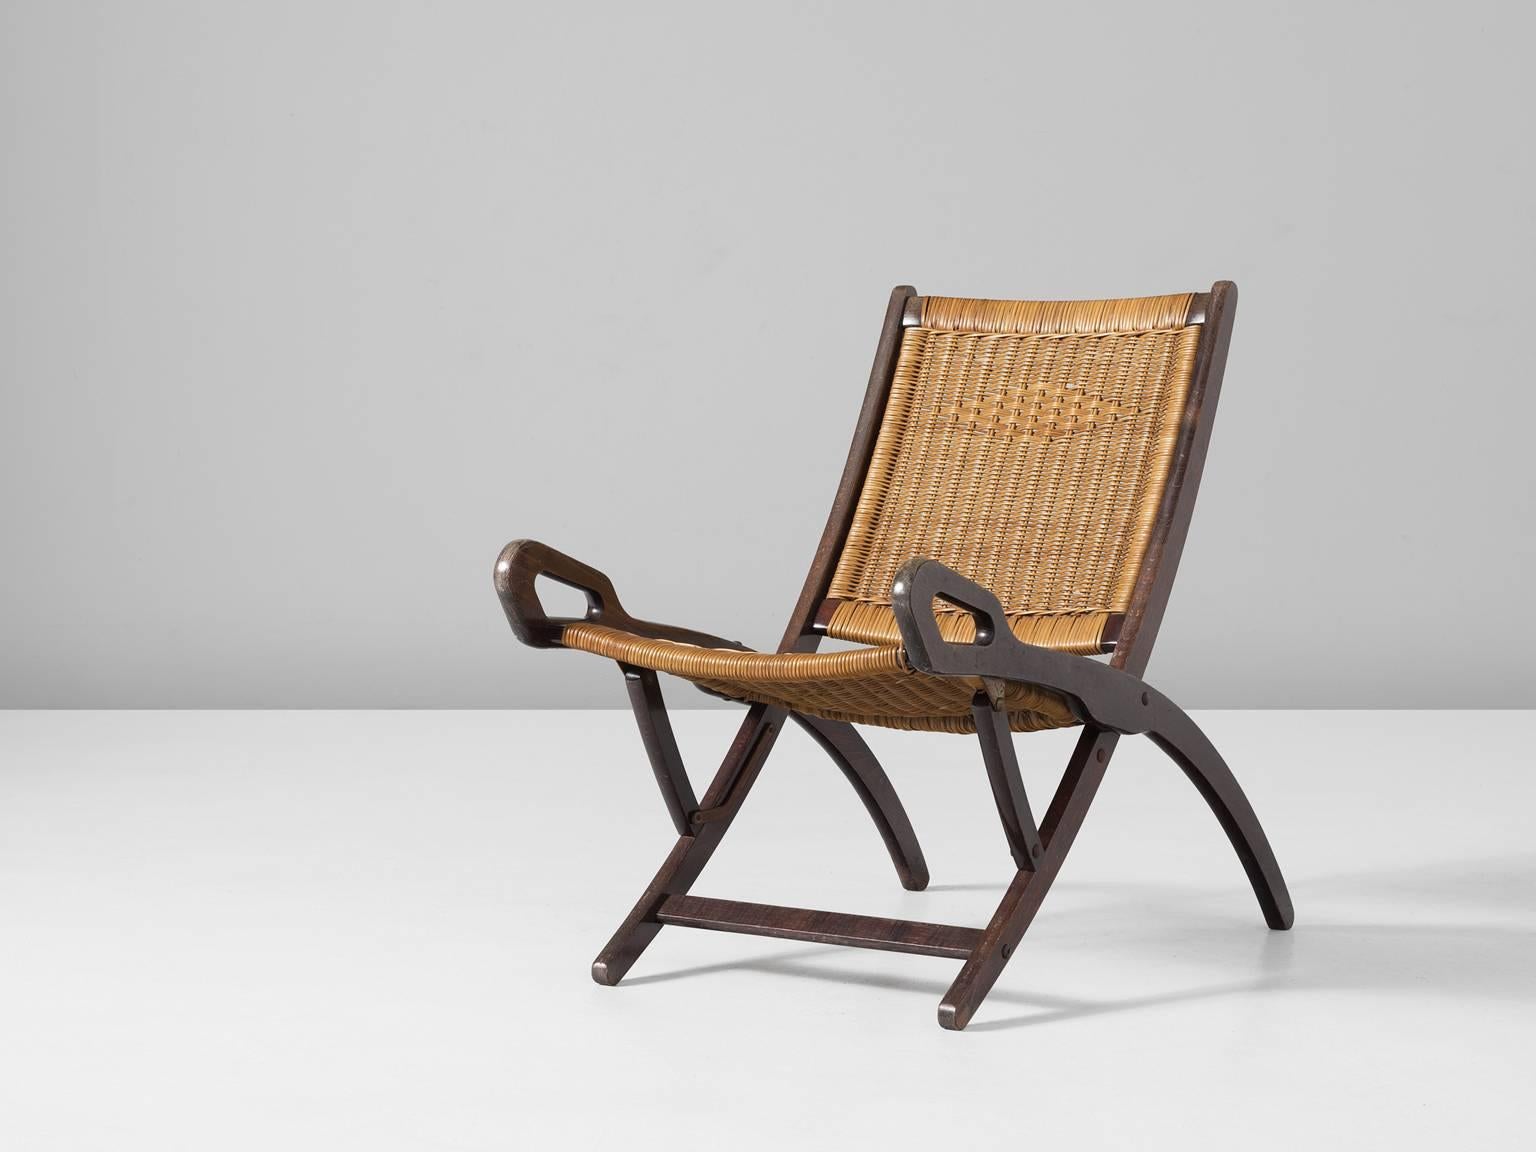 'Nifea' folding chair, in beech and cane, by Gio Ponti for Brevetti Reguitti, Italy, 1958.

Exclusive easy chair by Gio Ponti. This chair is upholstered with a woven rattan seating and back. This is what makes this chair unique, not many of these